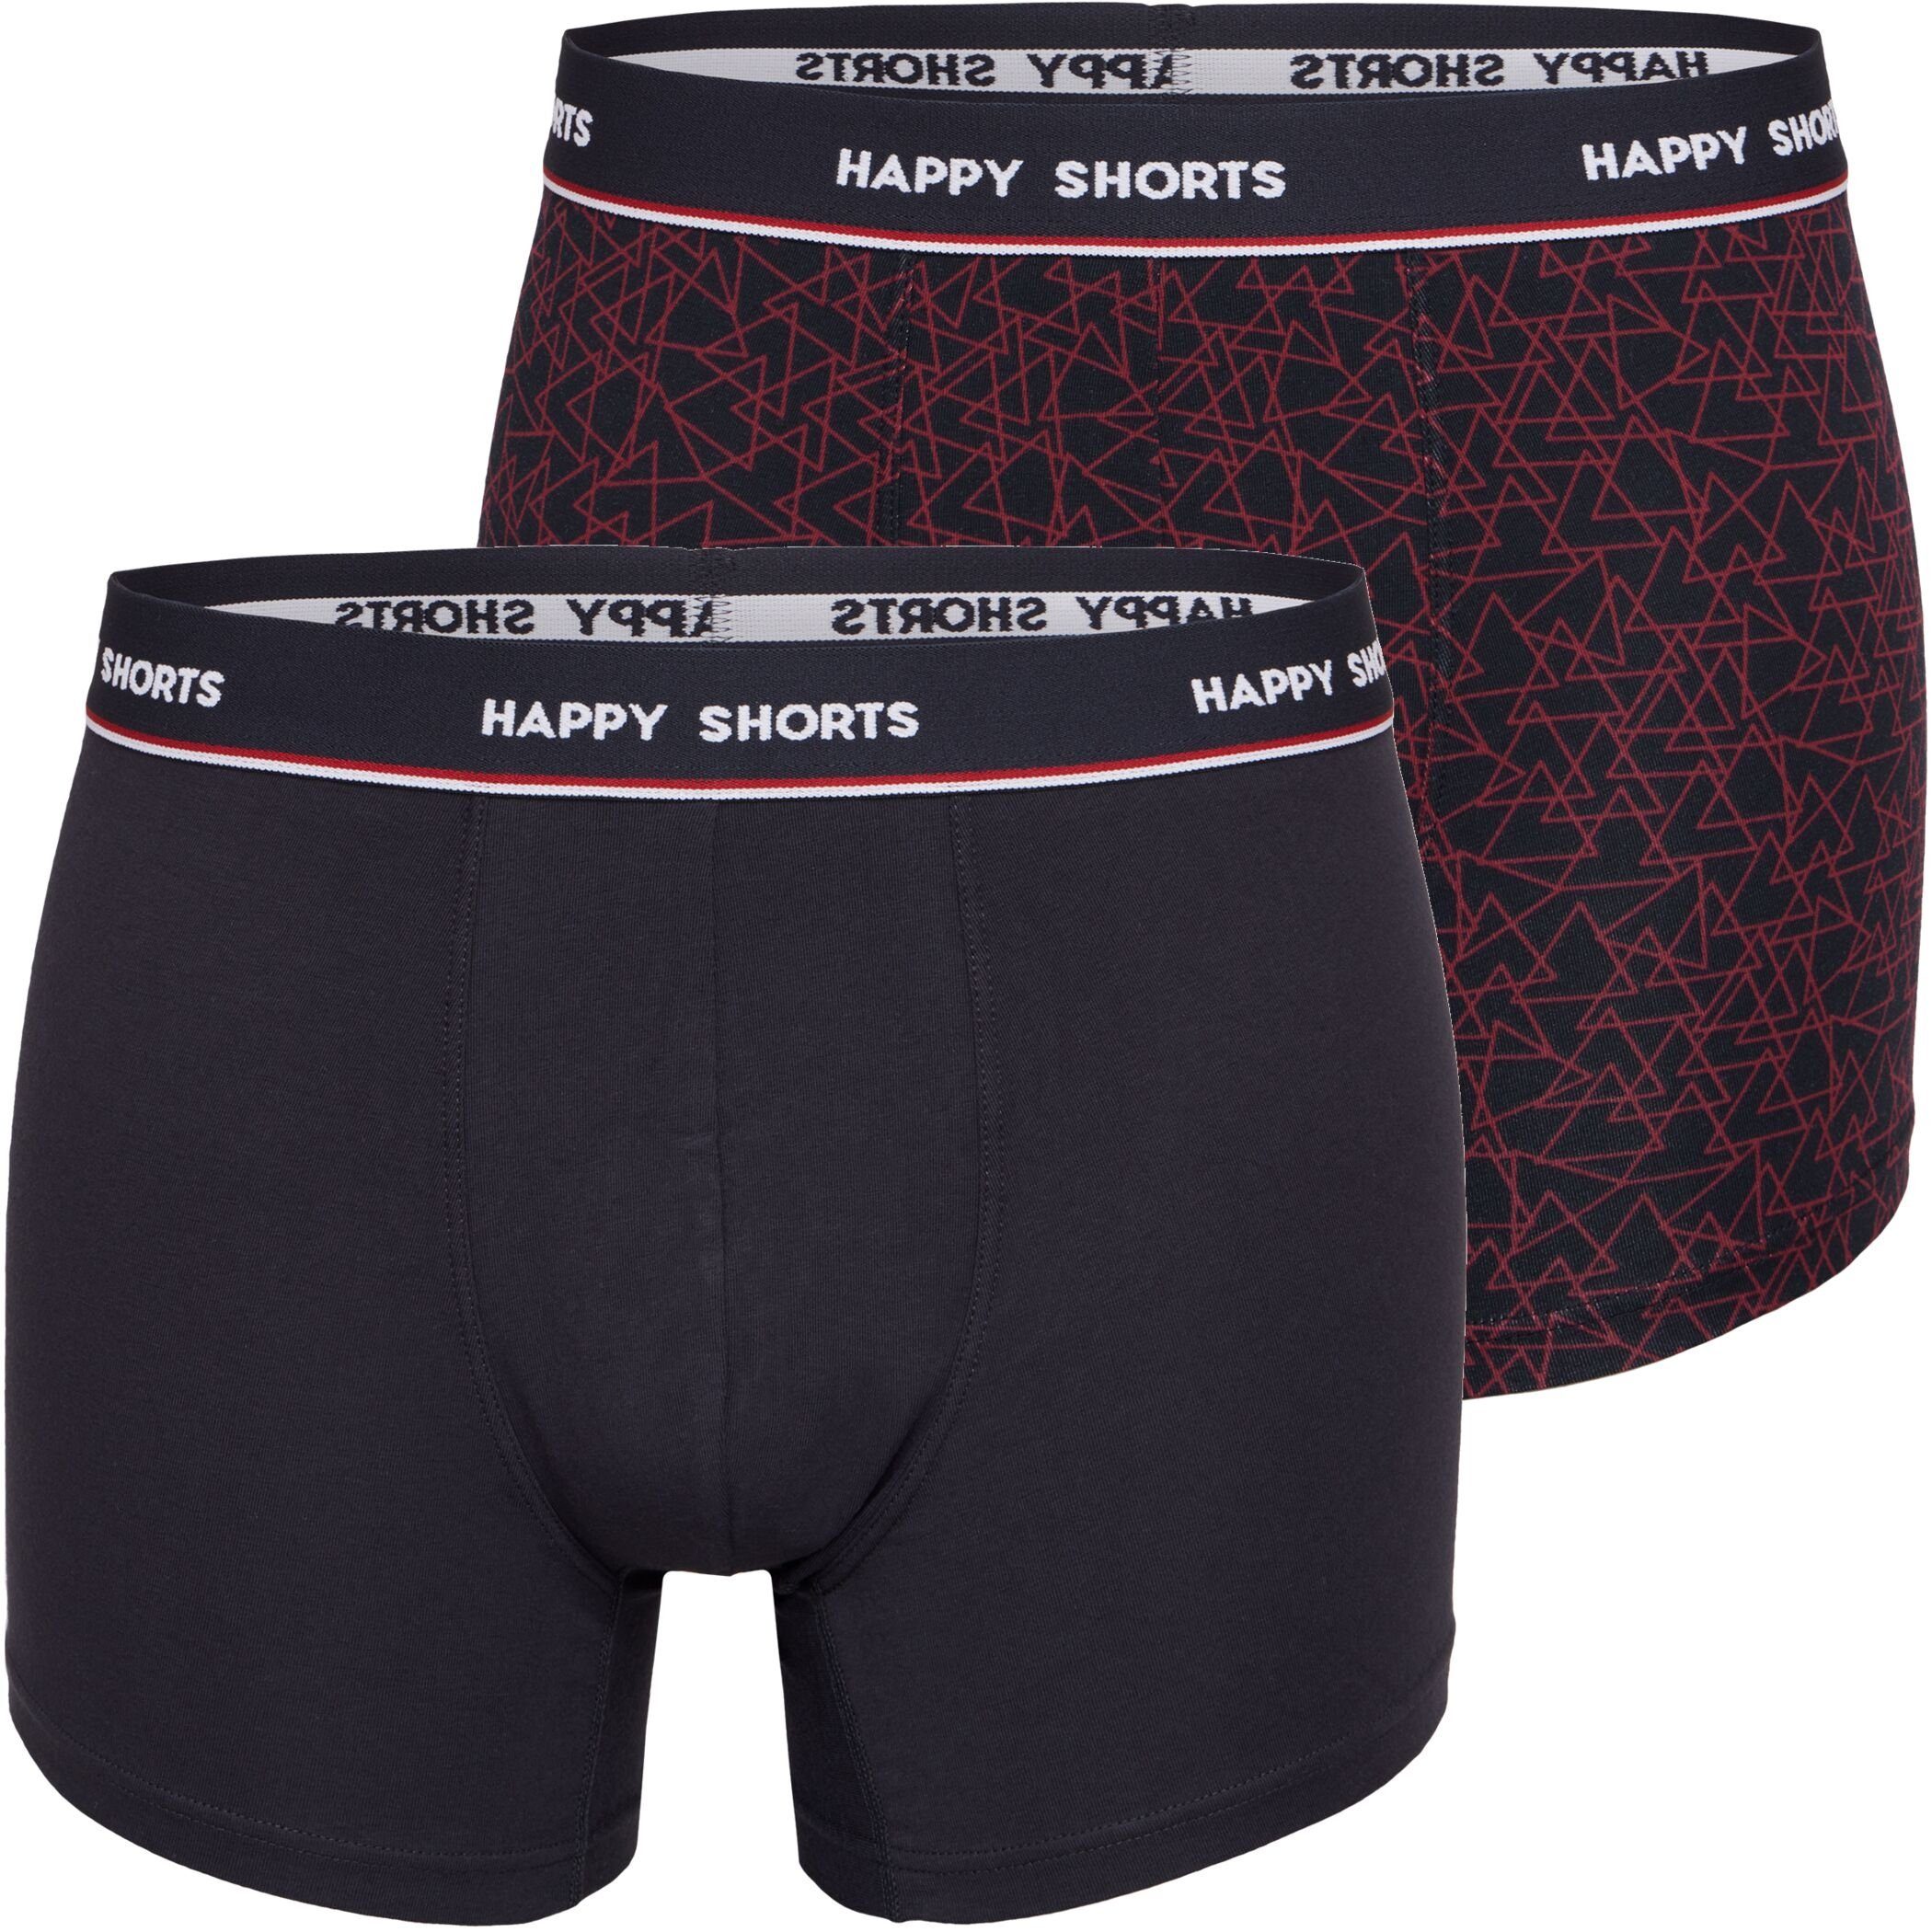 HAPPY SHORTS Trunk 2 Happy Shorts Pants Jersey Trunk Herren Rote Dreiecke - Red Triangles (1-St) | Boxershorts